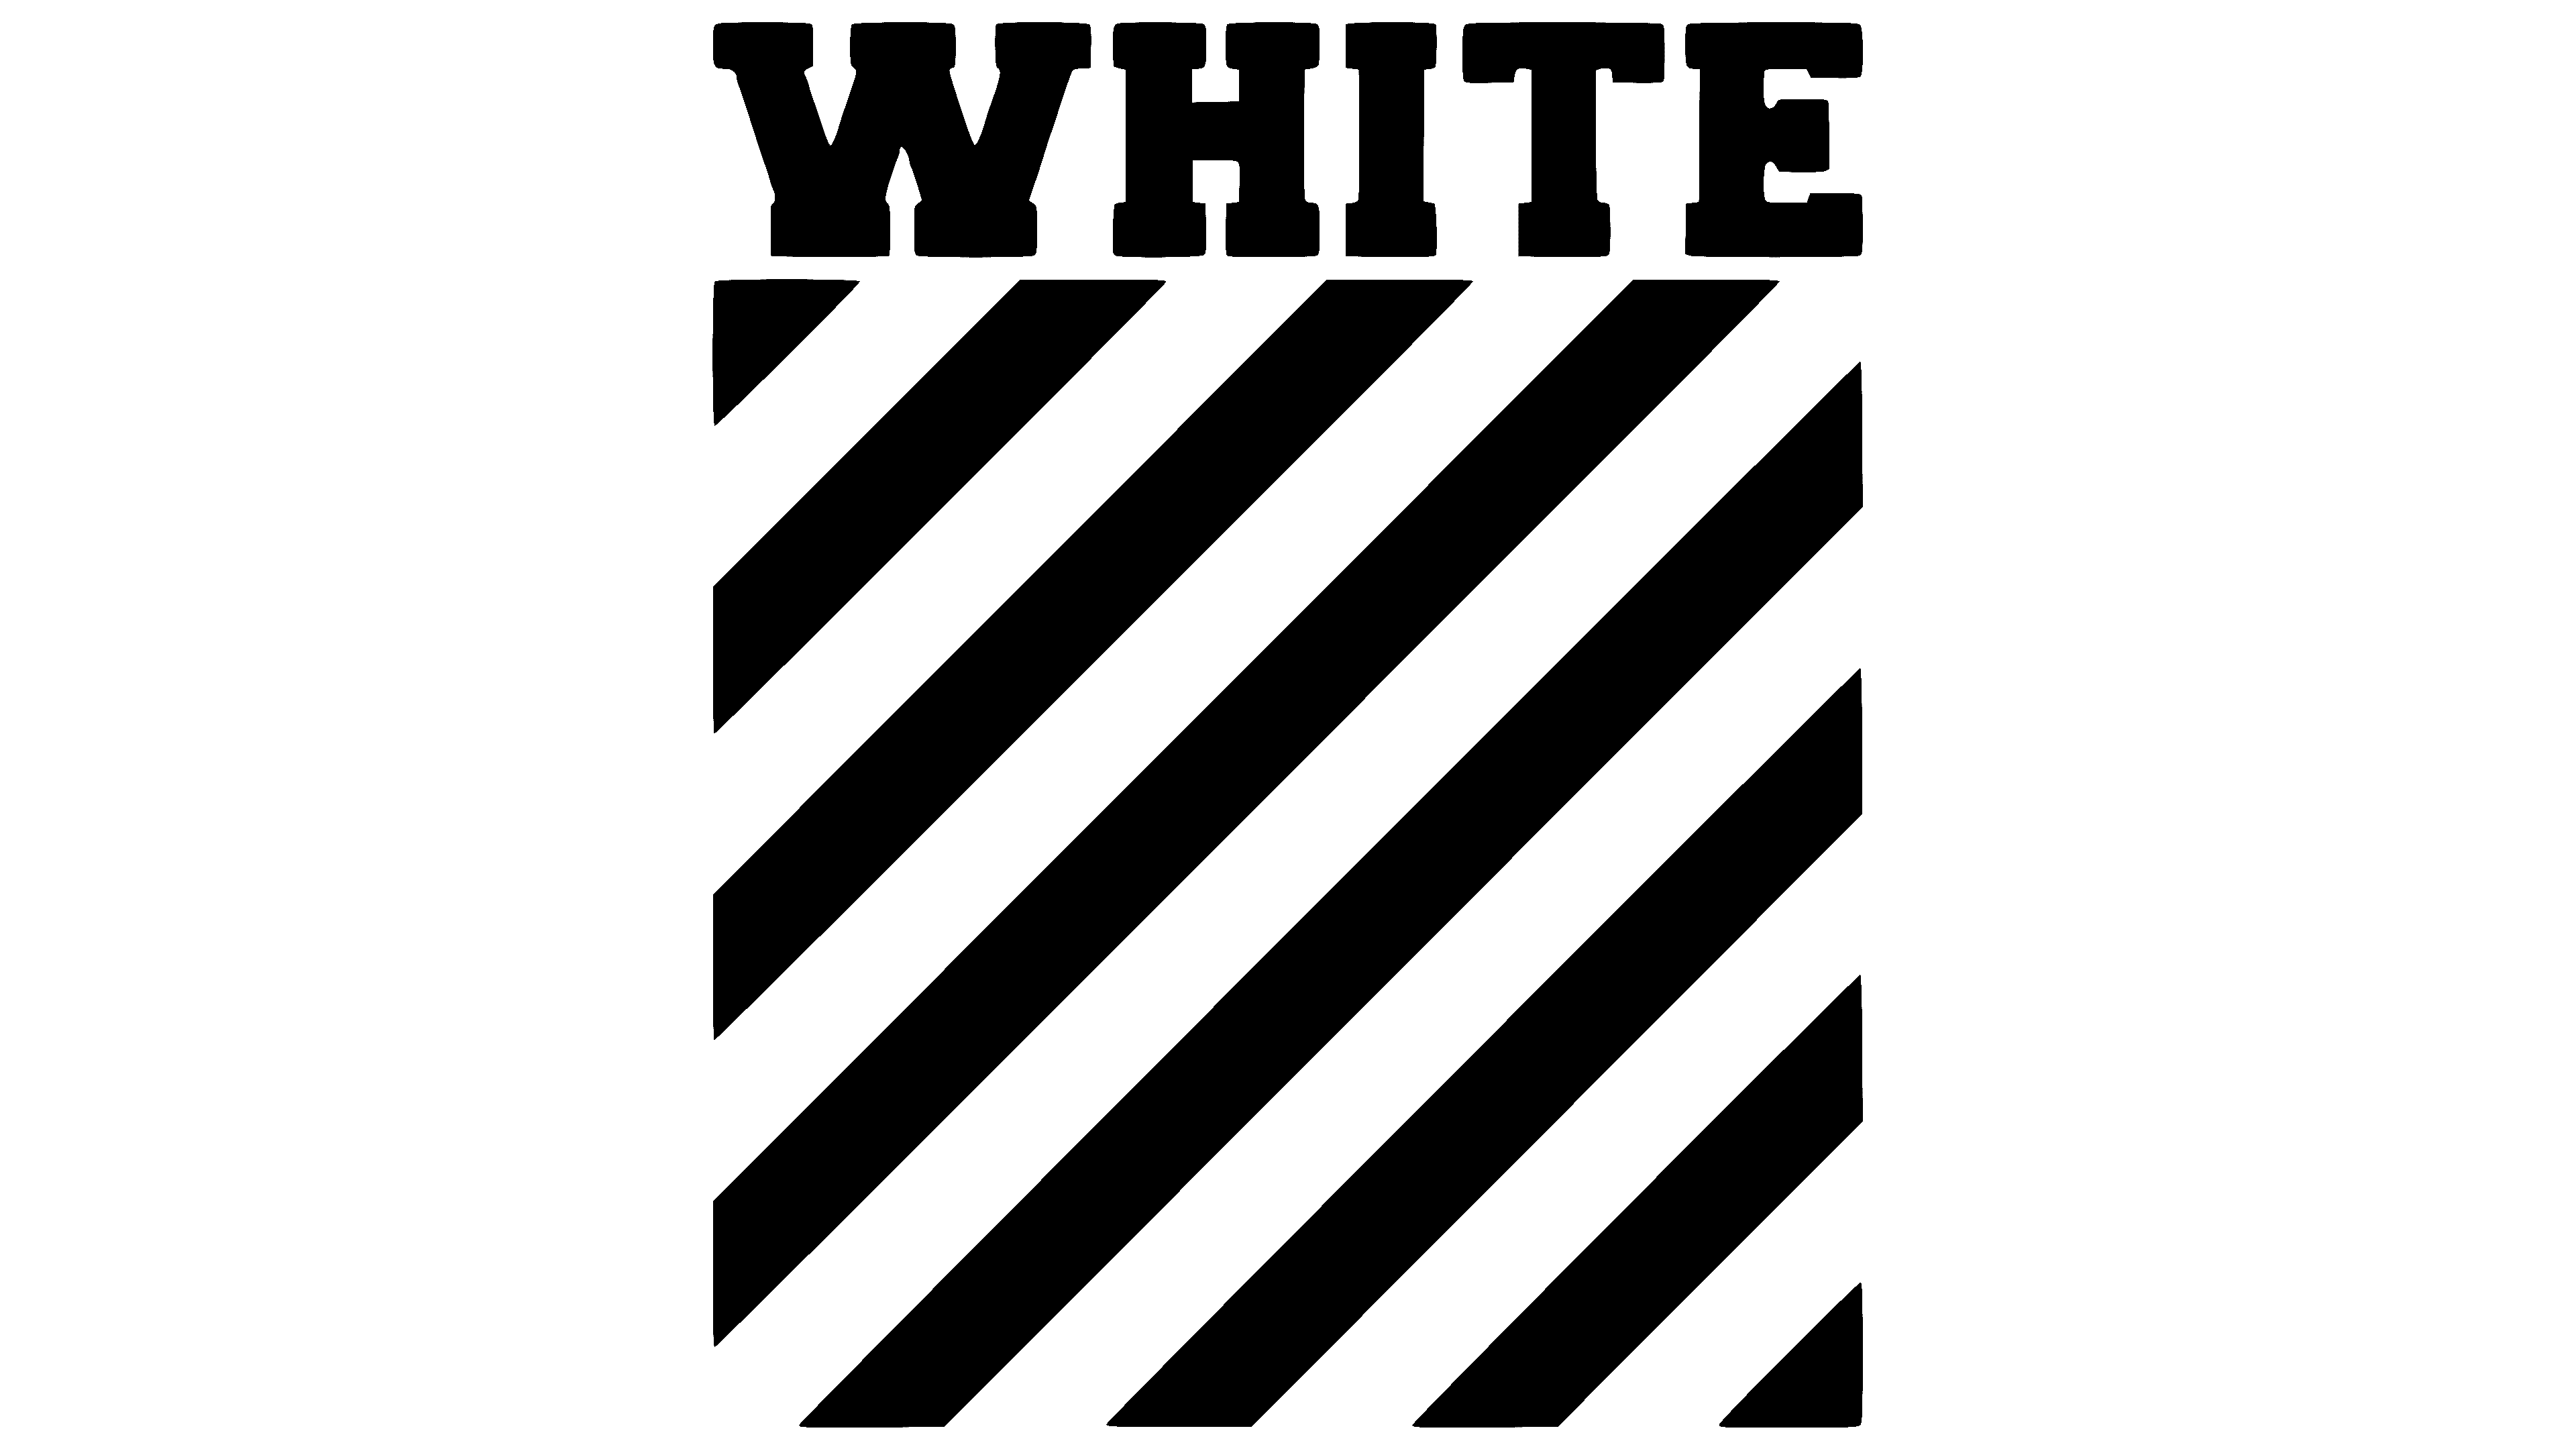 Is Off-White updating its logo?